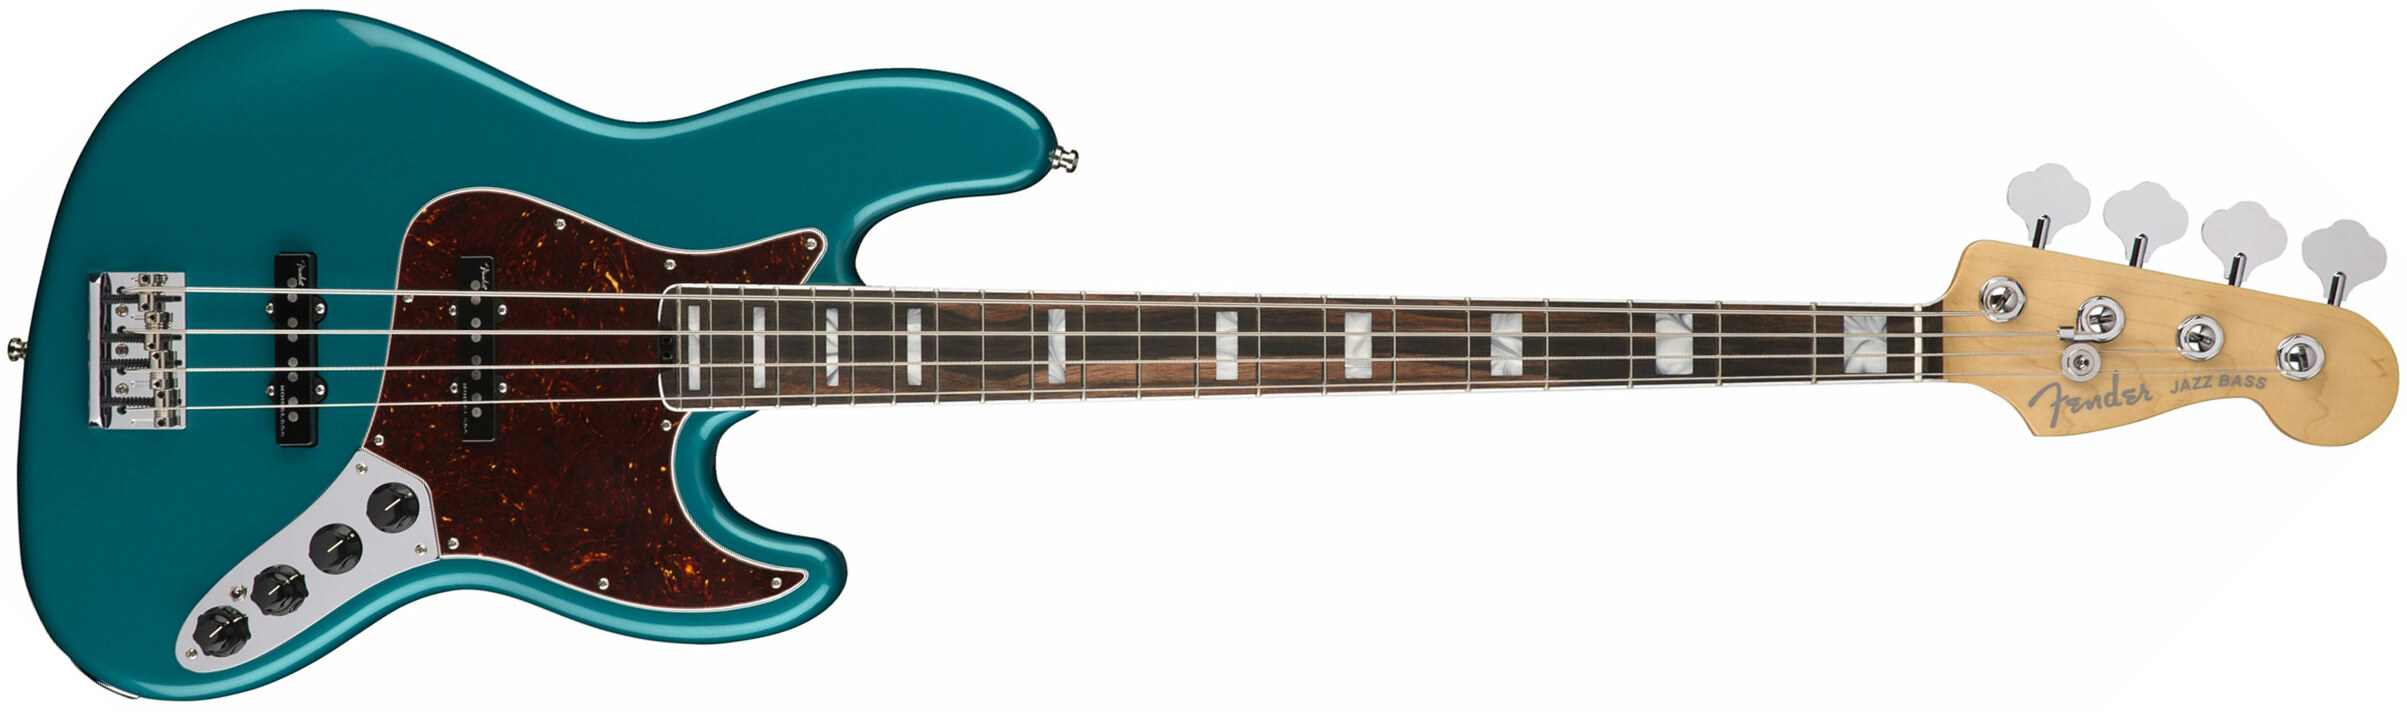 Fender American Elite Jazz Bass 2018 Usa Eb - Ocean Turquoise - Basse Électrique Solid Body - Main picture